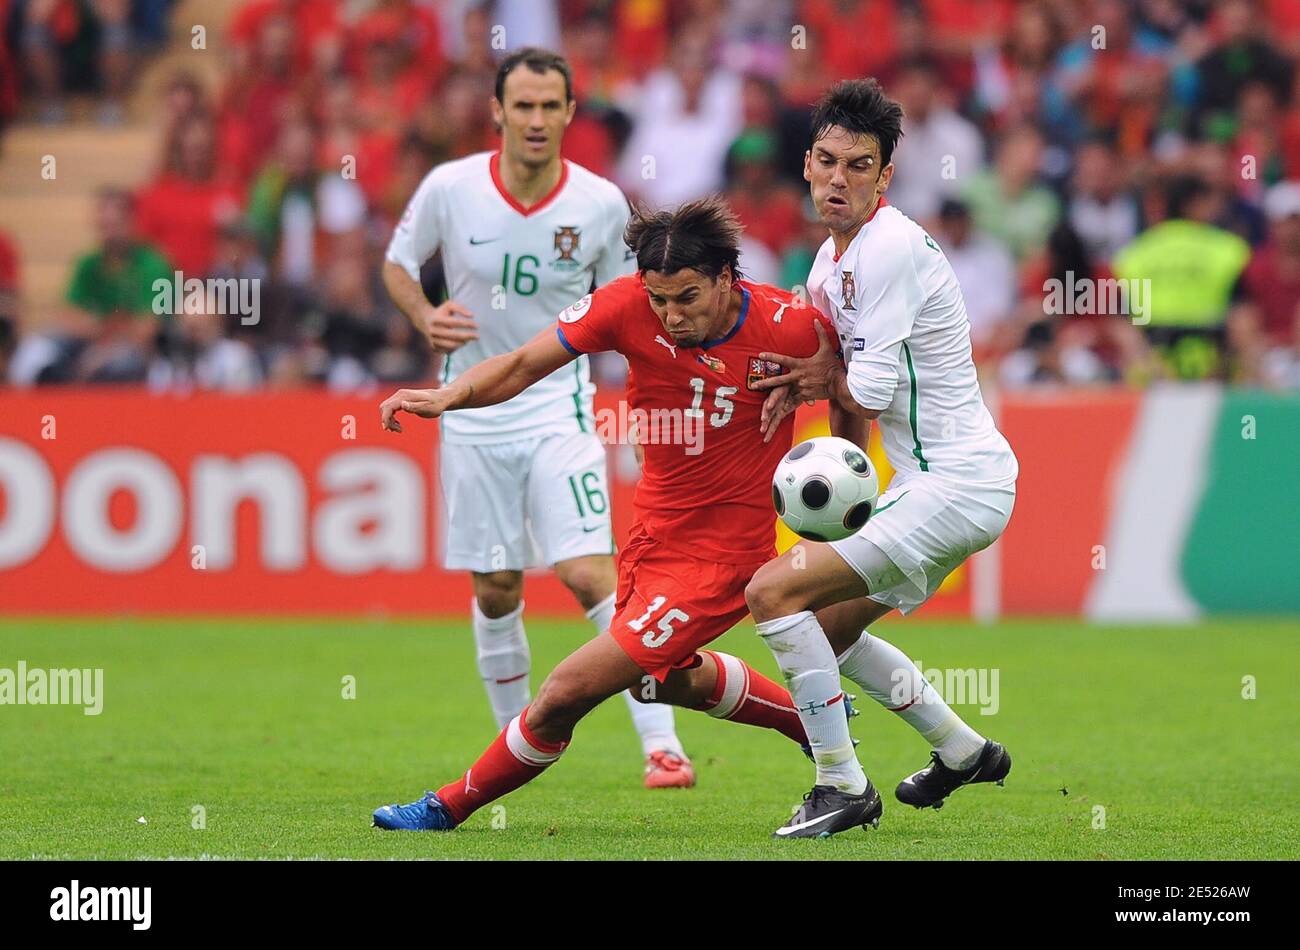 Czech Republic's Milan Baros (L) and Portugal's Paulo Ferreira battle for  the ball during the Euro 2008 UEFA Championships soccer match, Group A,  Portugal vs Czech Republic at Stade de Geneve in